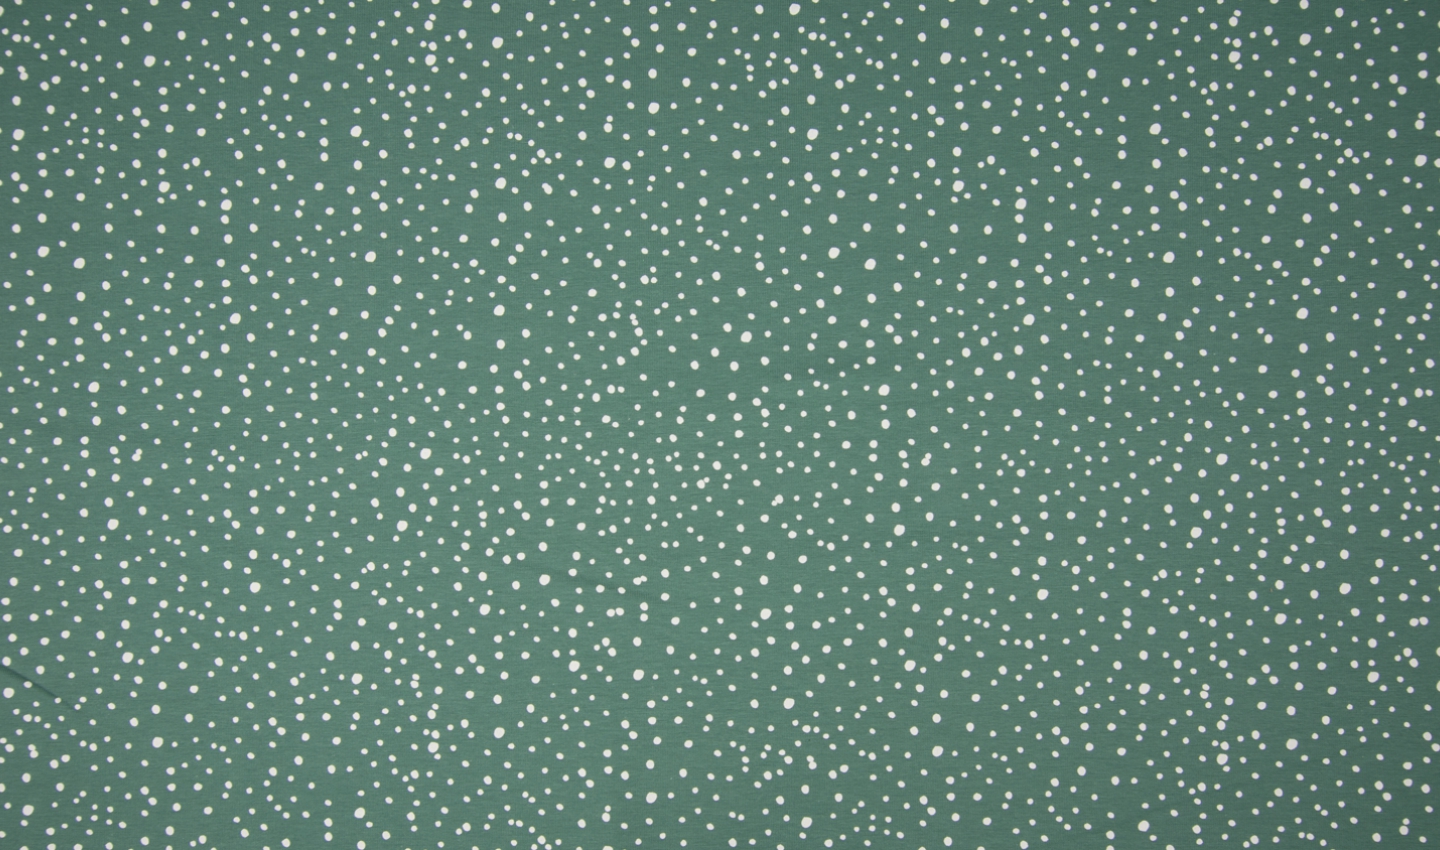 altmint dashed dots